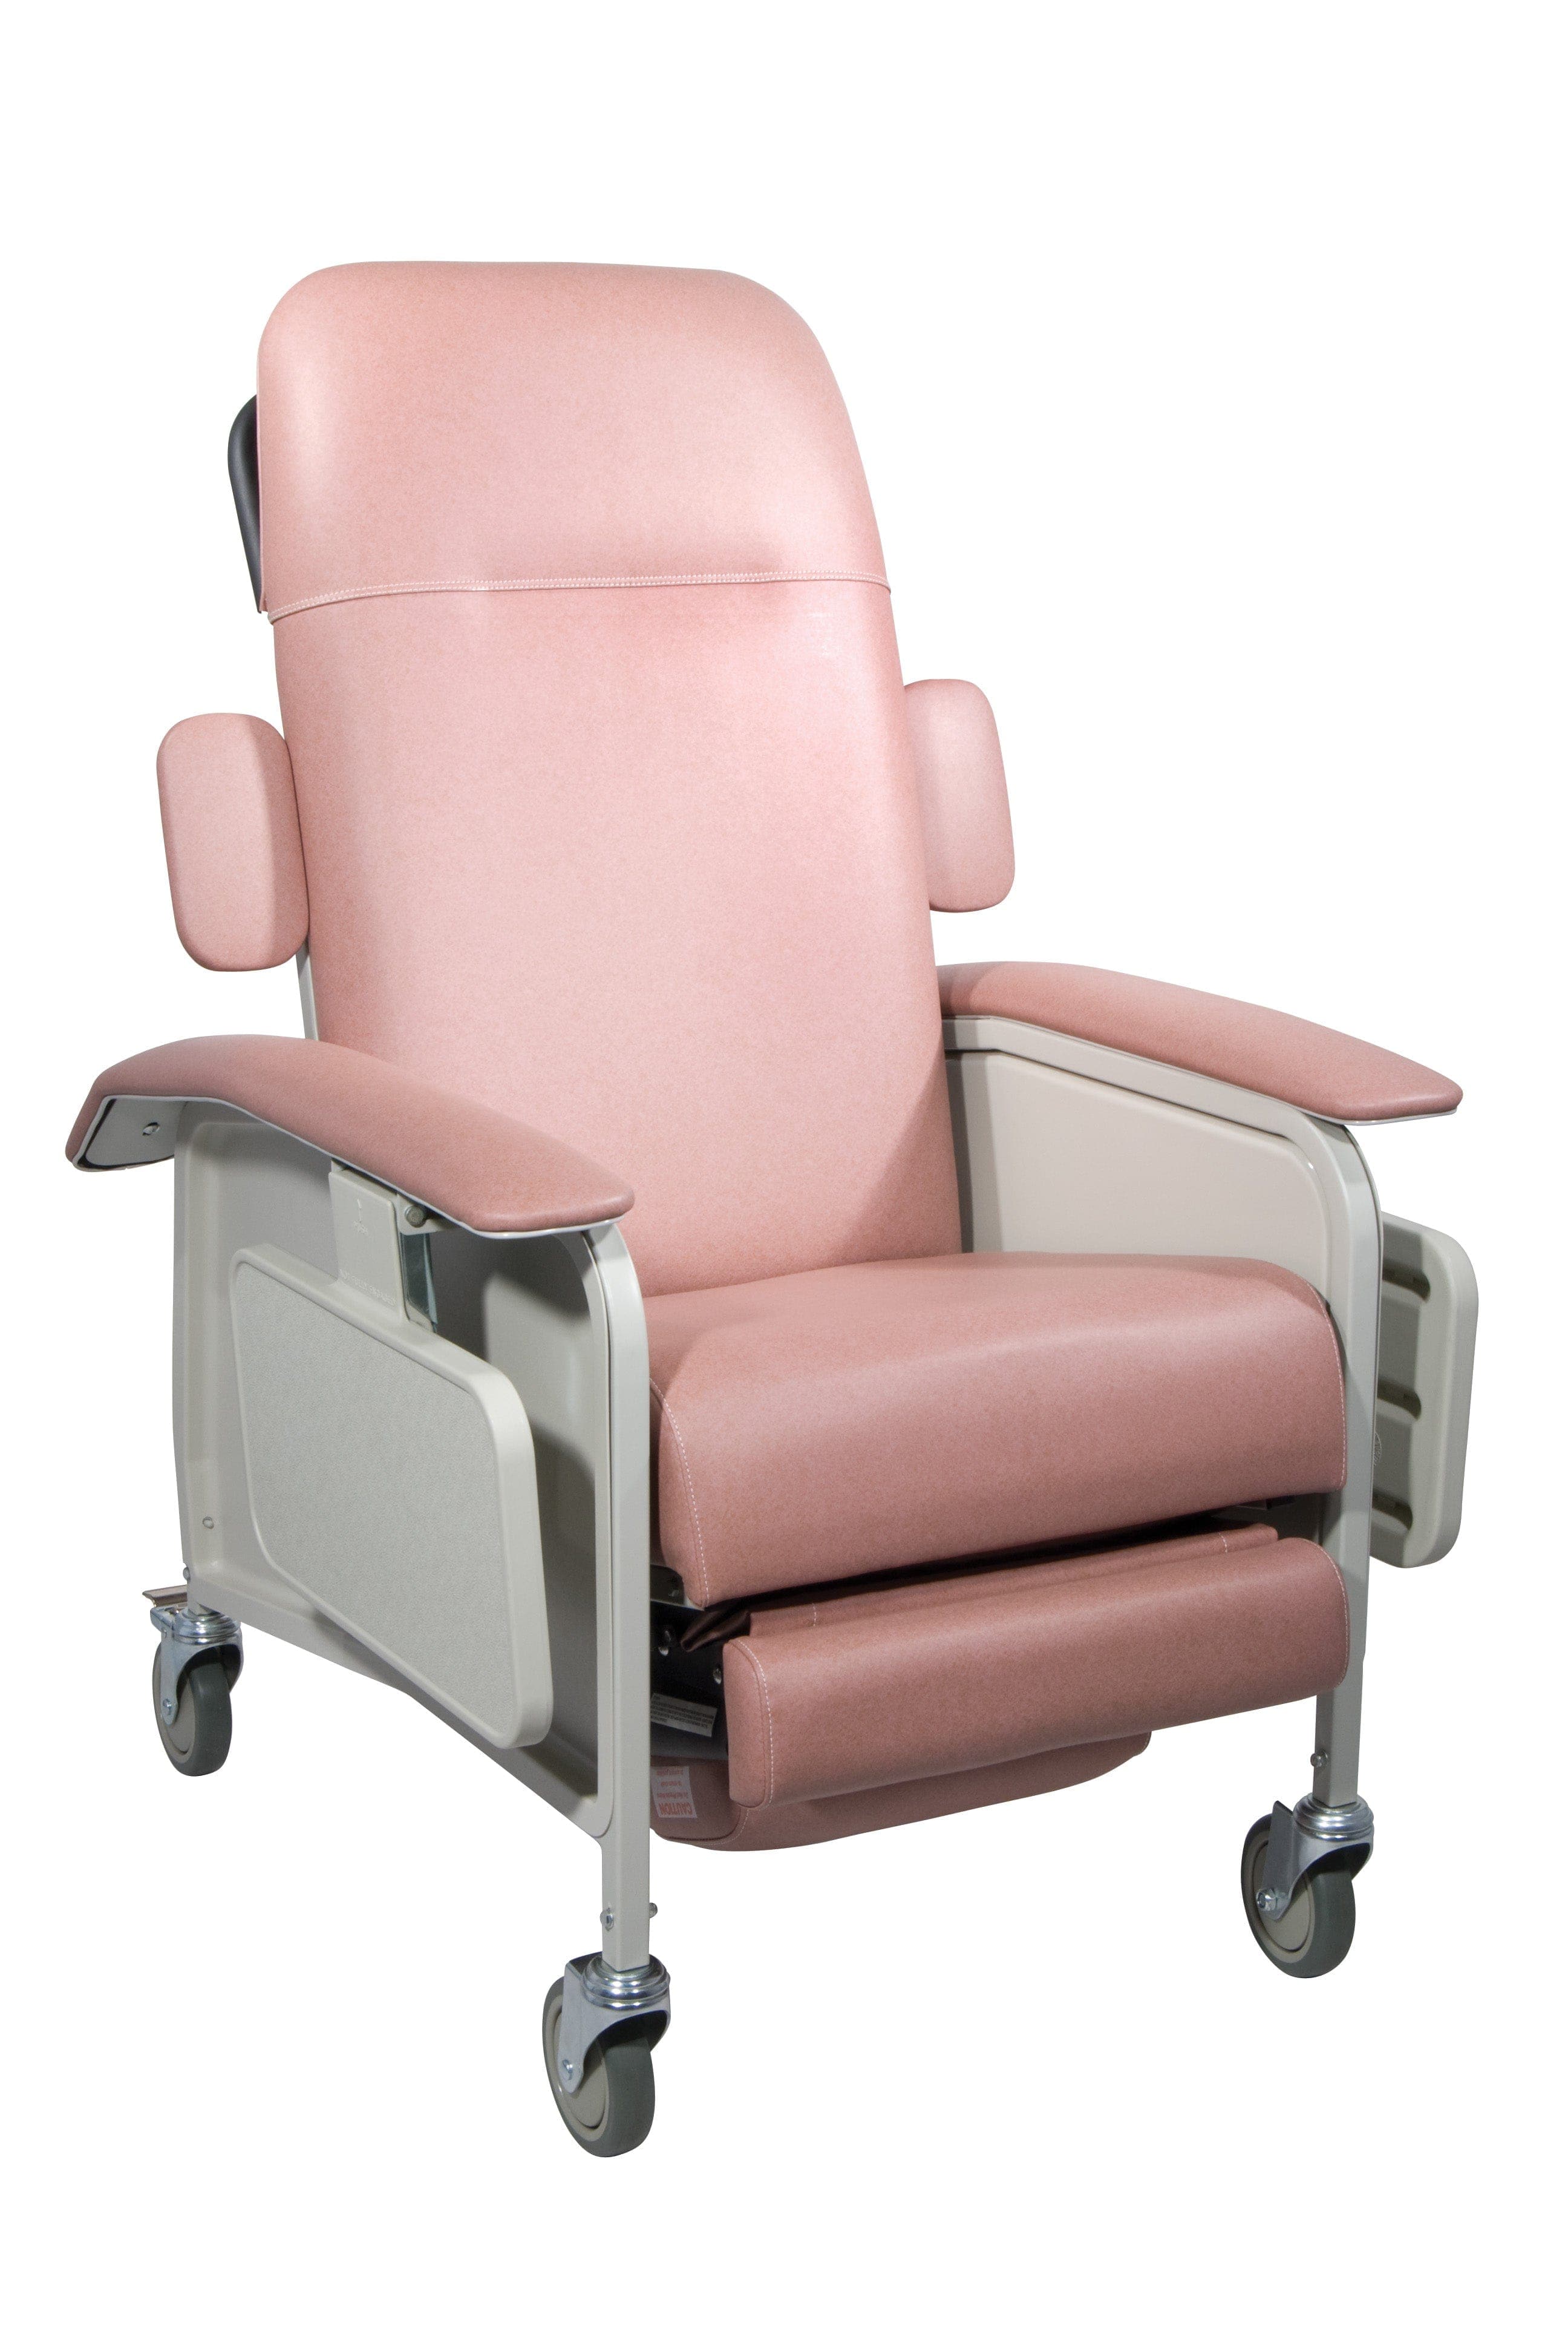 Drive Medical Patient Room Rosewood Drive Medical Clinical Care Geri Chair Recliner